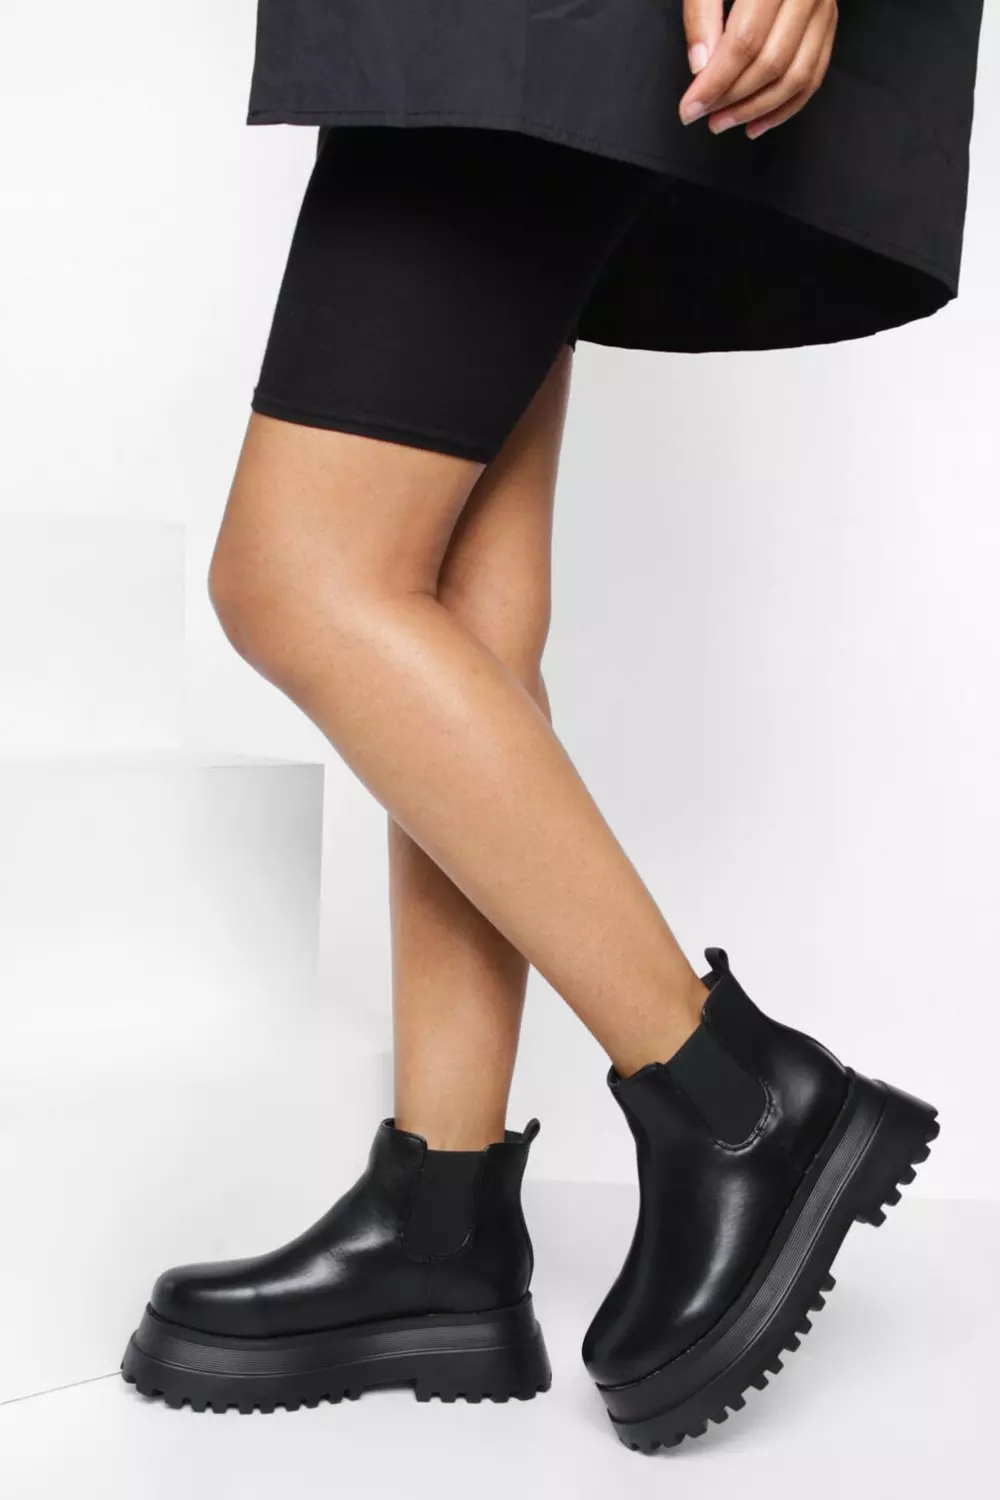 Lagring plantageejer skruenøgle Wide Width Extreme Chunky Chelsea Ankle Boot | boohoo